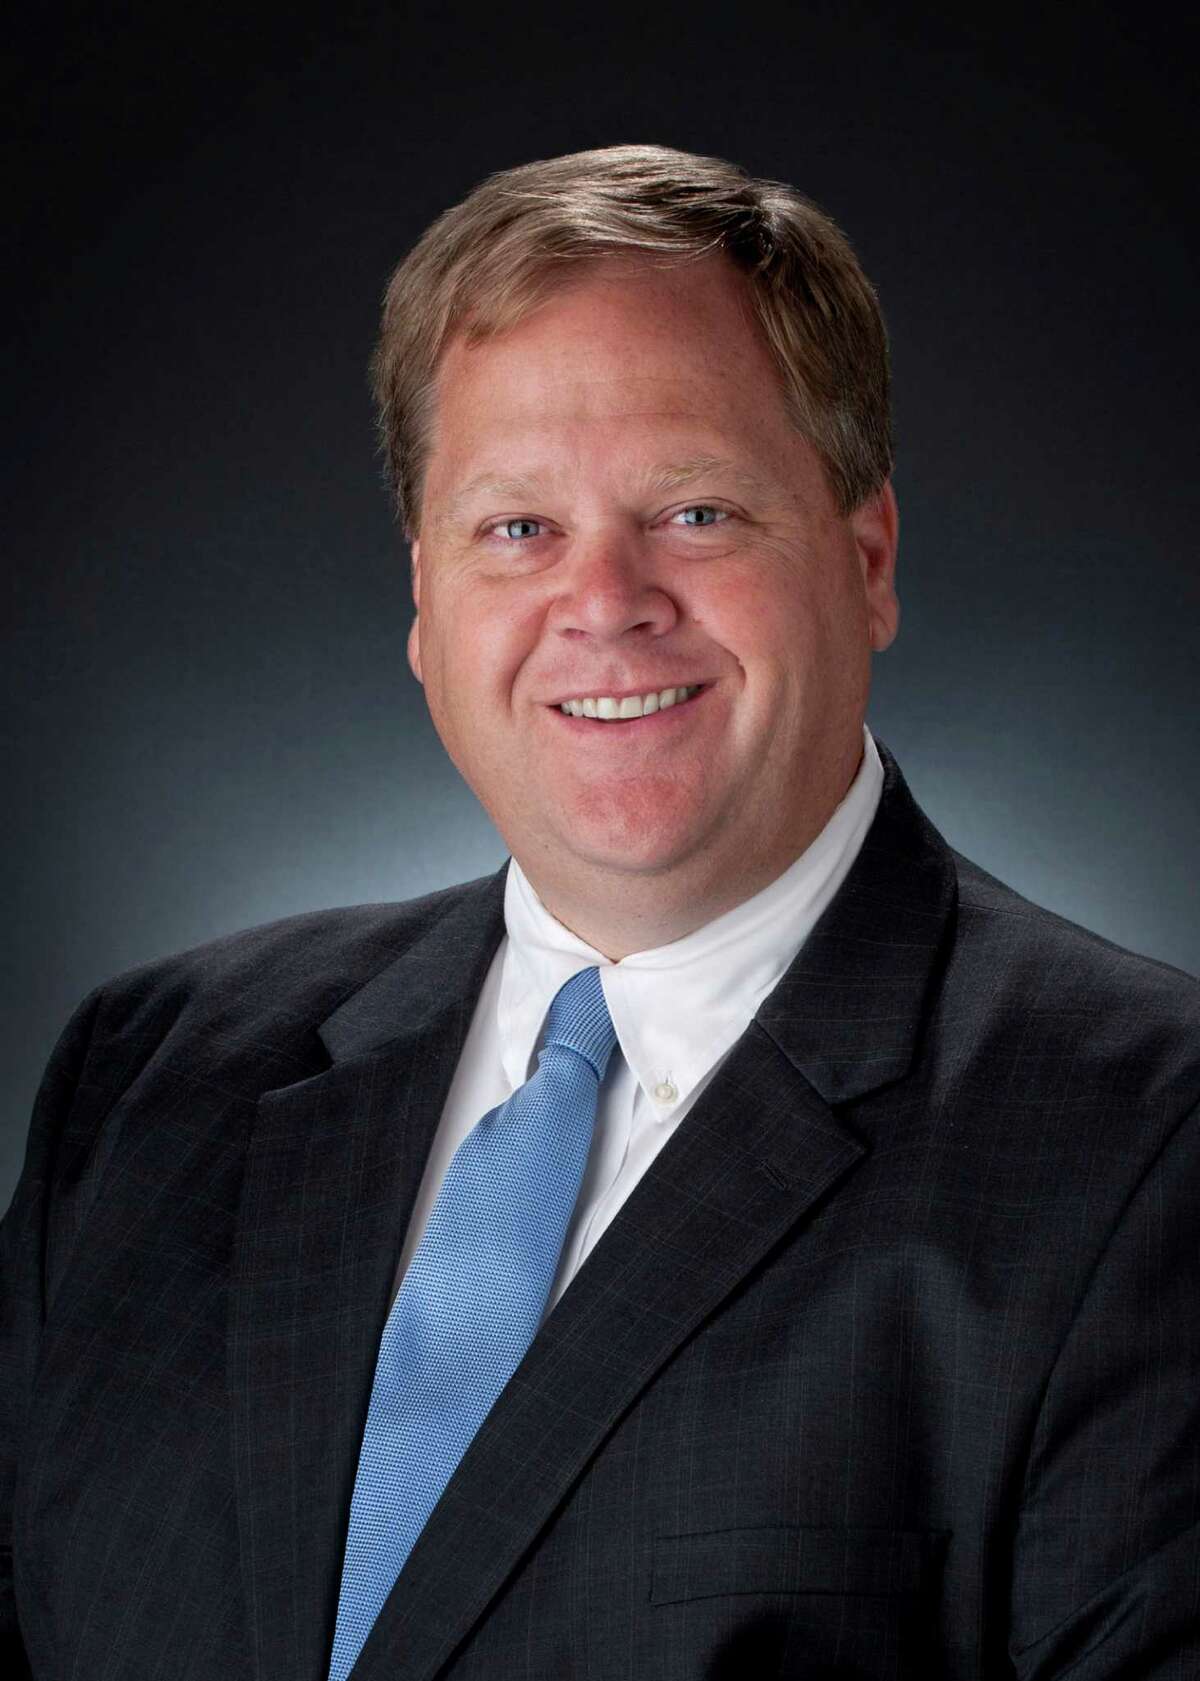 Jonathan “Jon” Turton has officially been named the new president of Baptist Medical Center in downtown San Antonio.